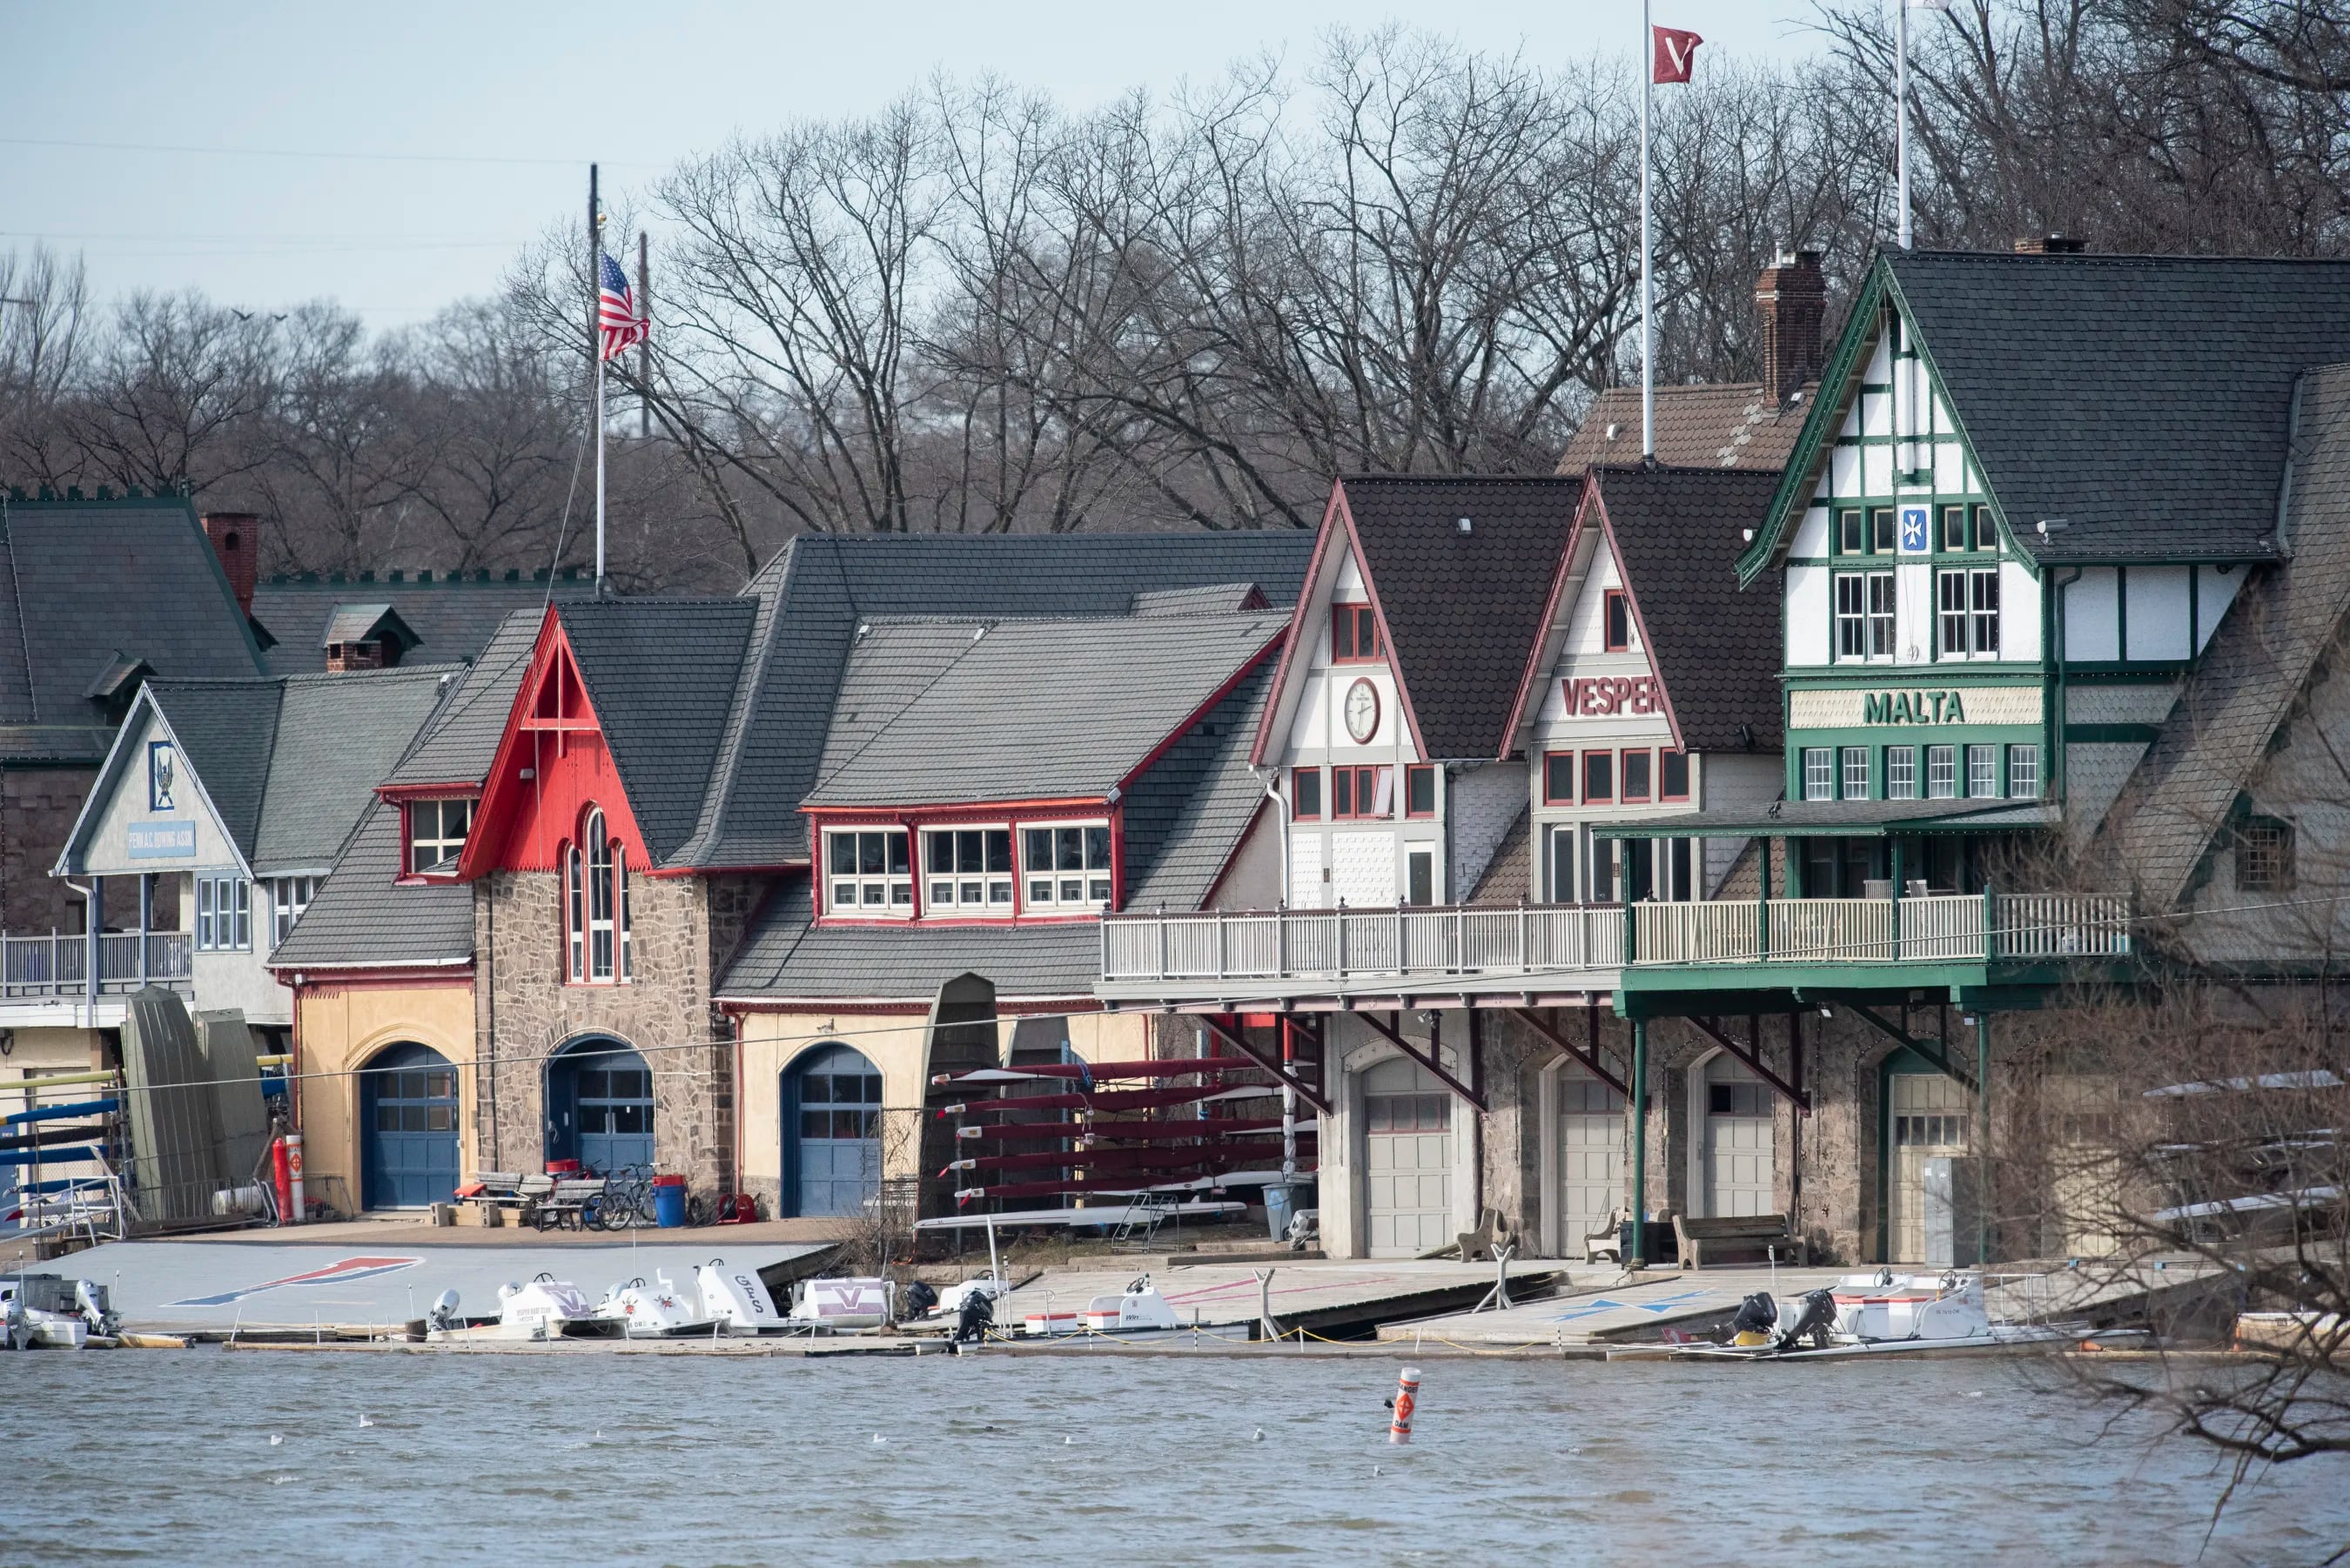 The 76ers, Diversity and Boathouse Row